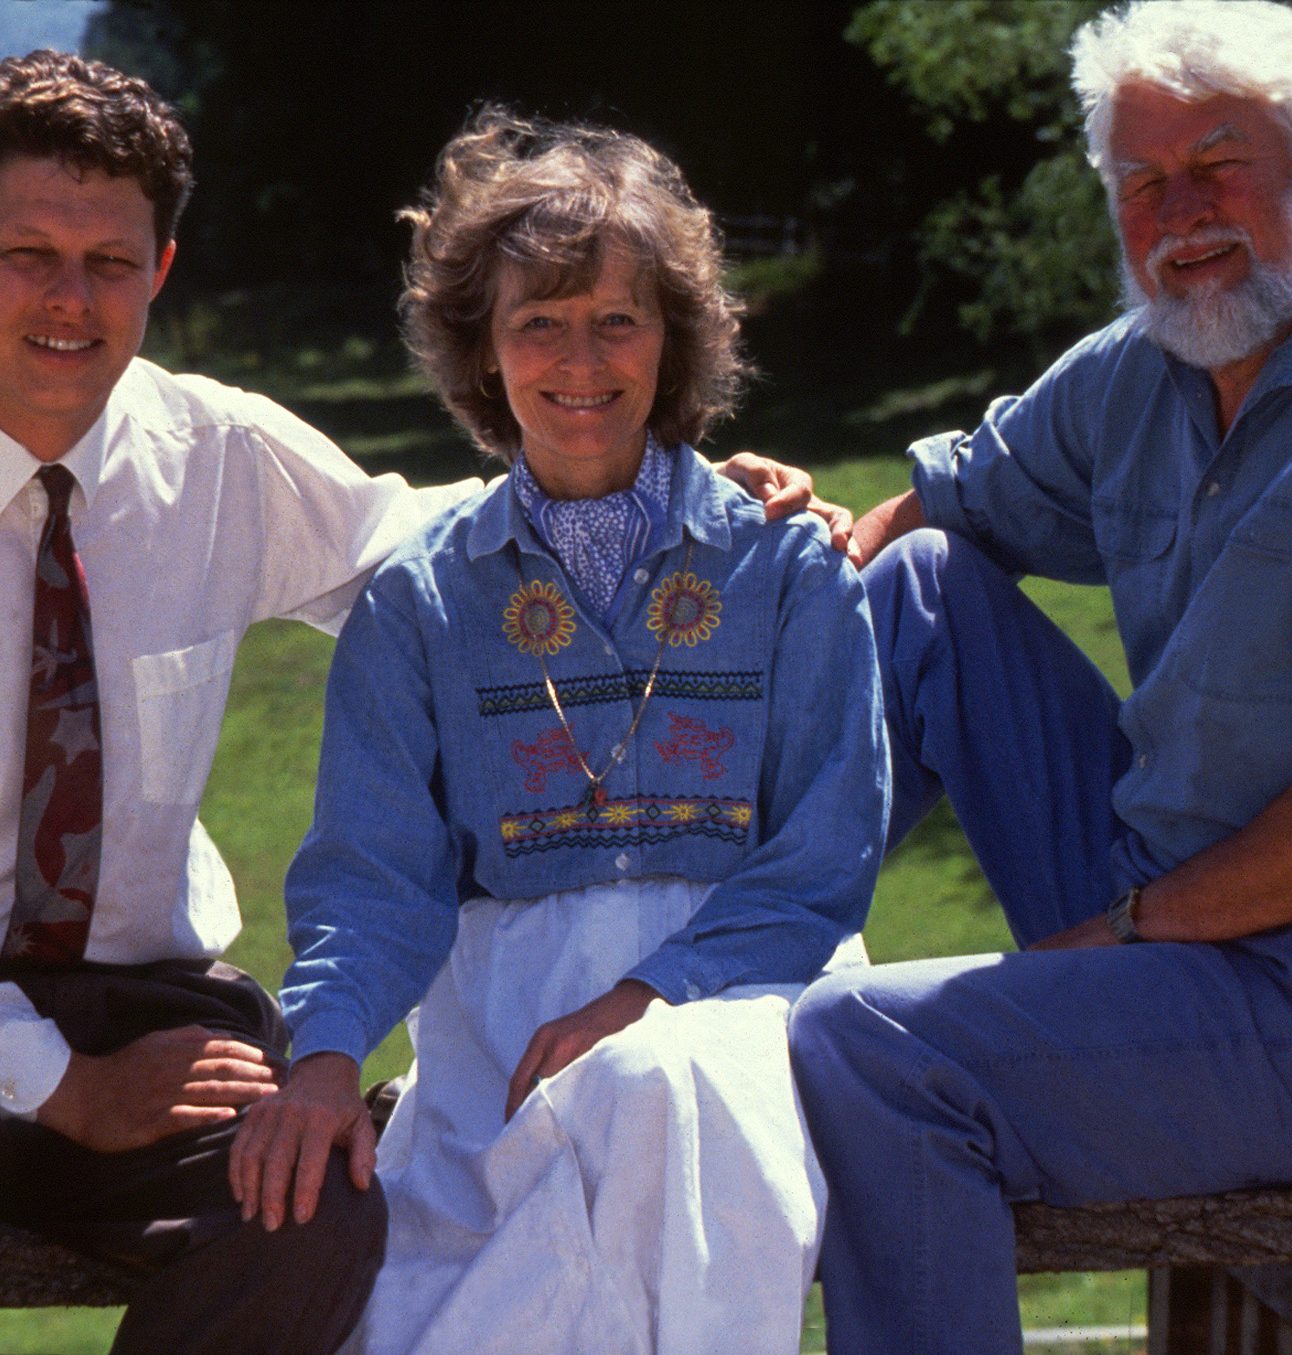 Will Travers, Virginia McKenna, and Bill Travers sat together